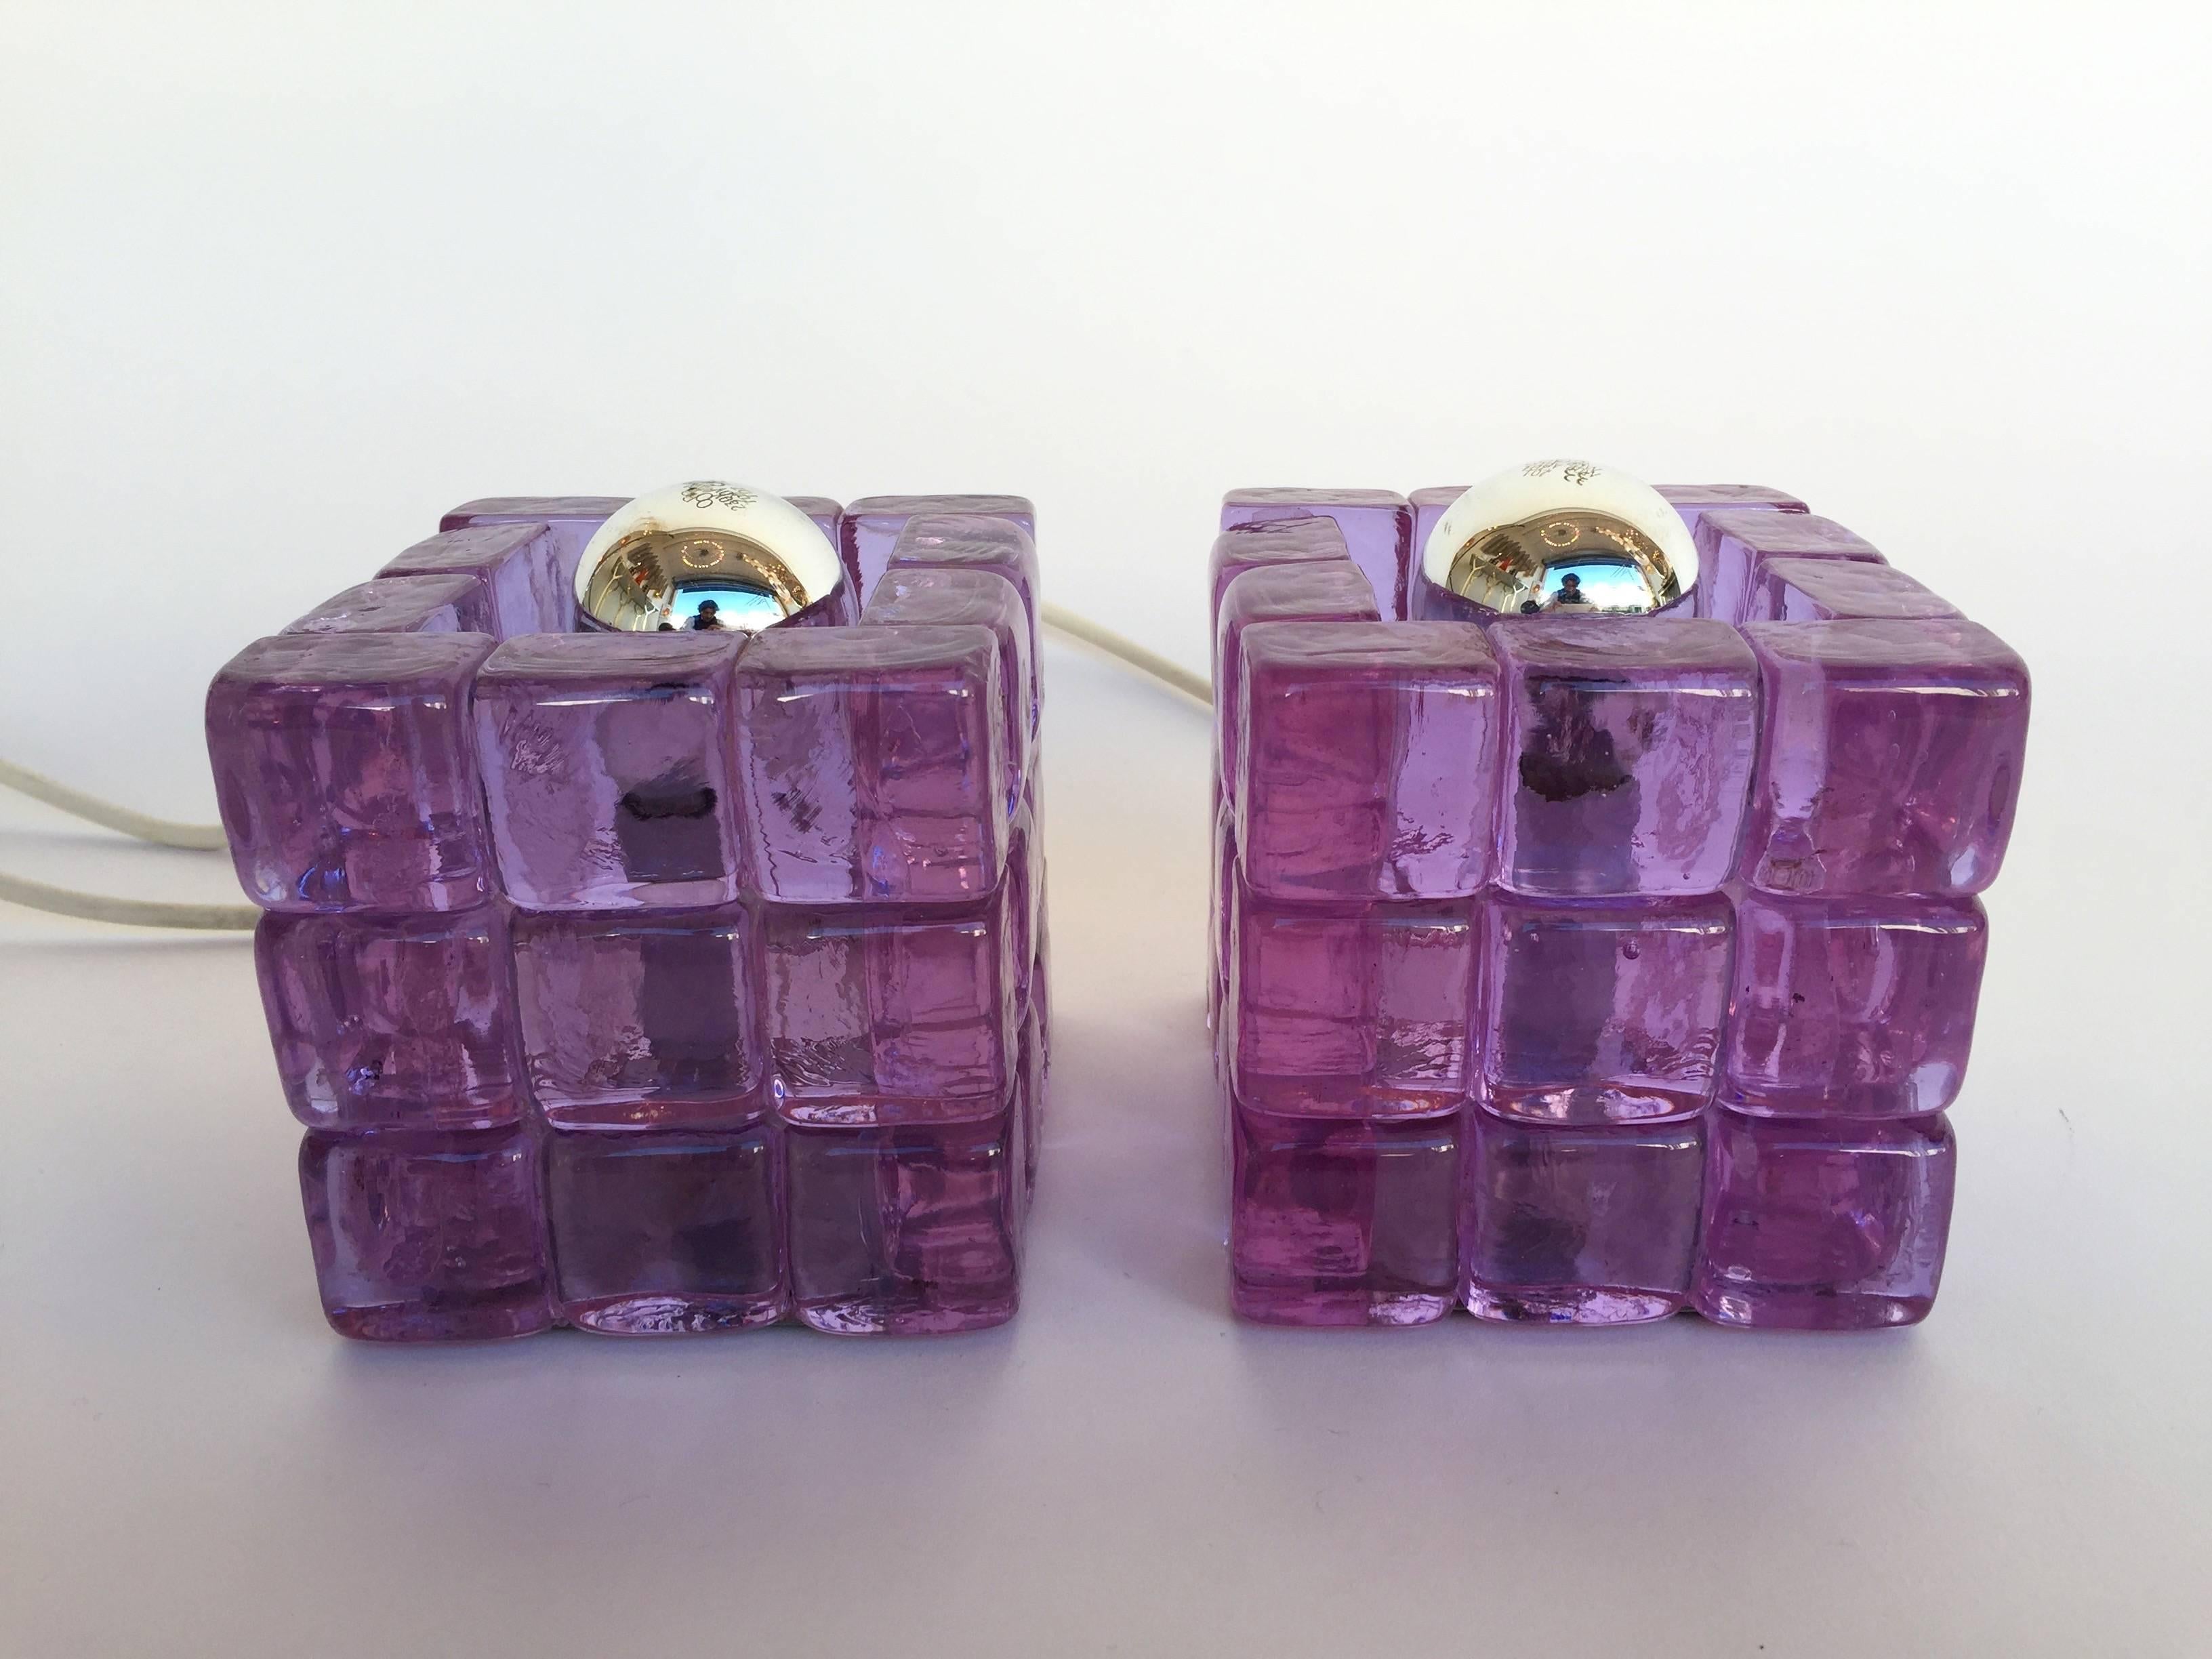 Italian Pair of Cube Lamps by Poliarte, Italy, 1970s